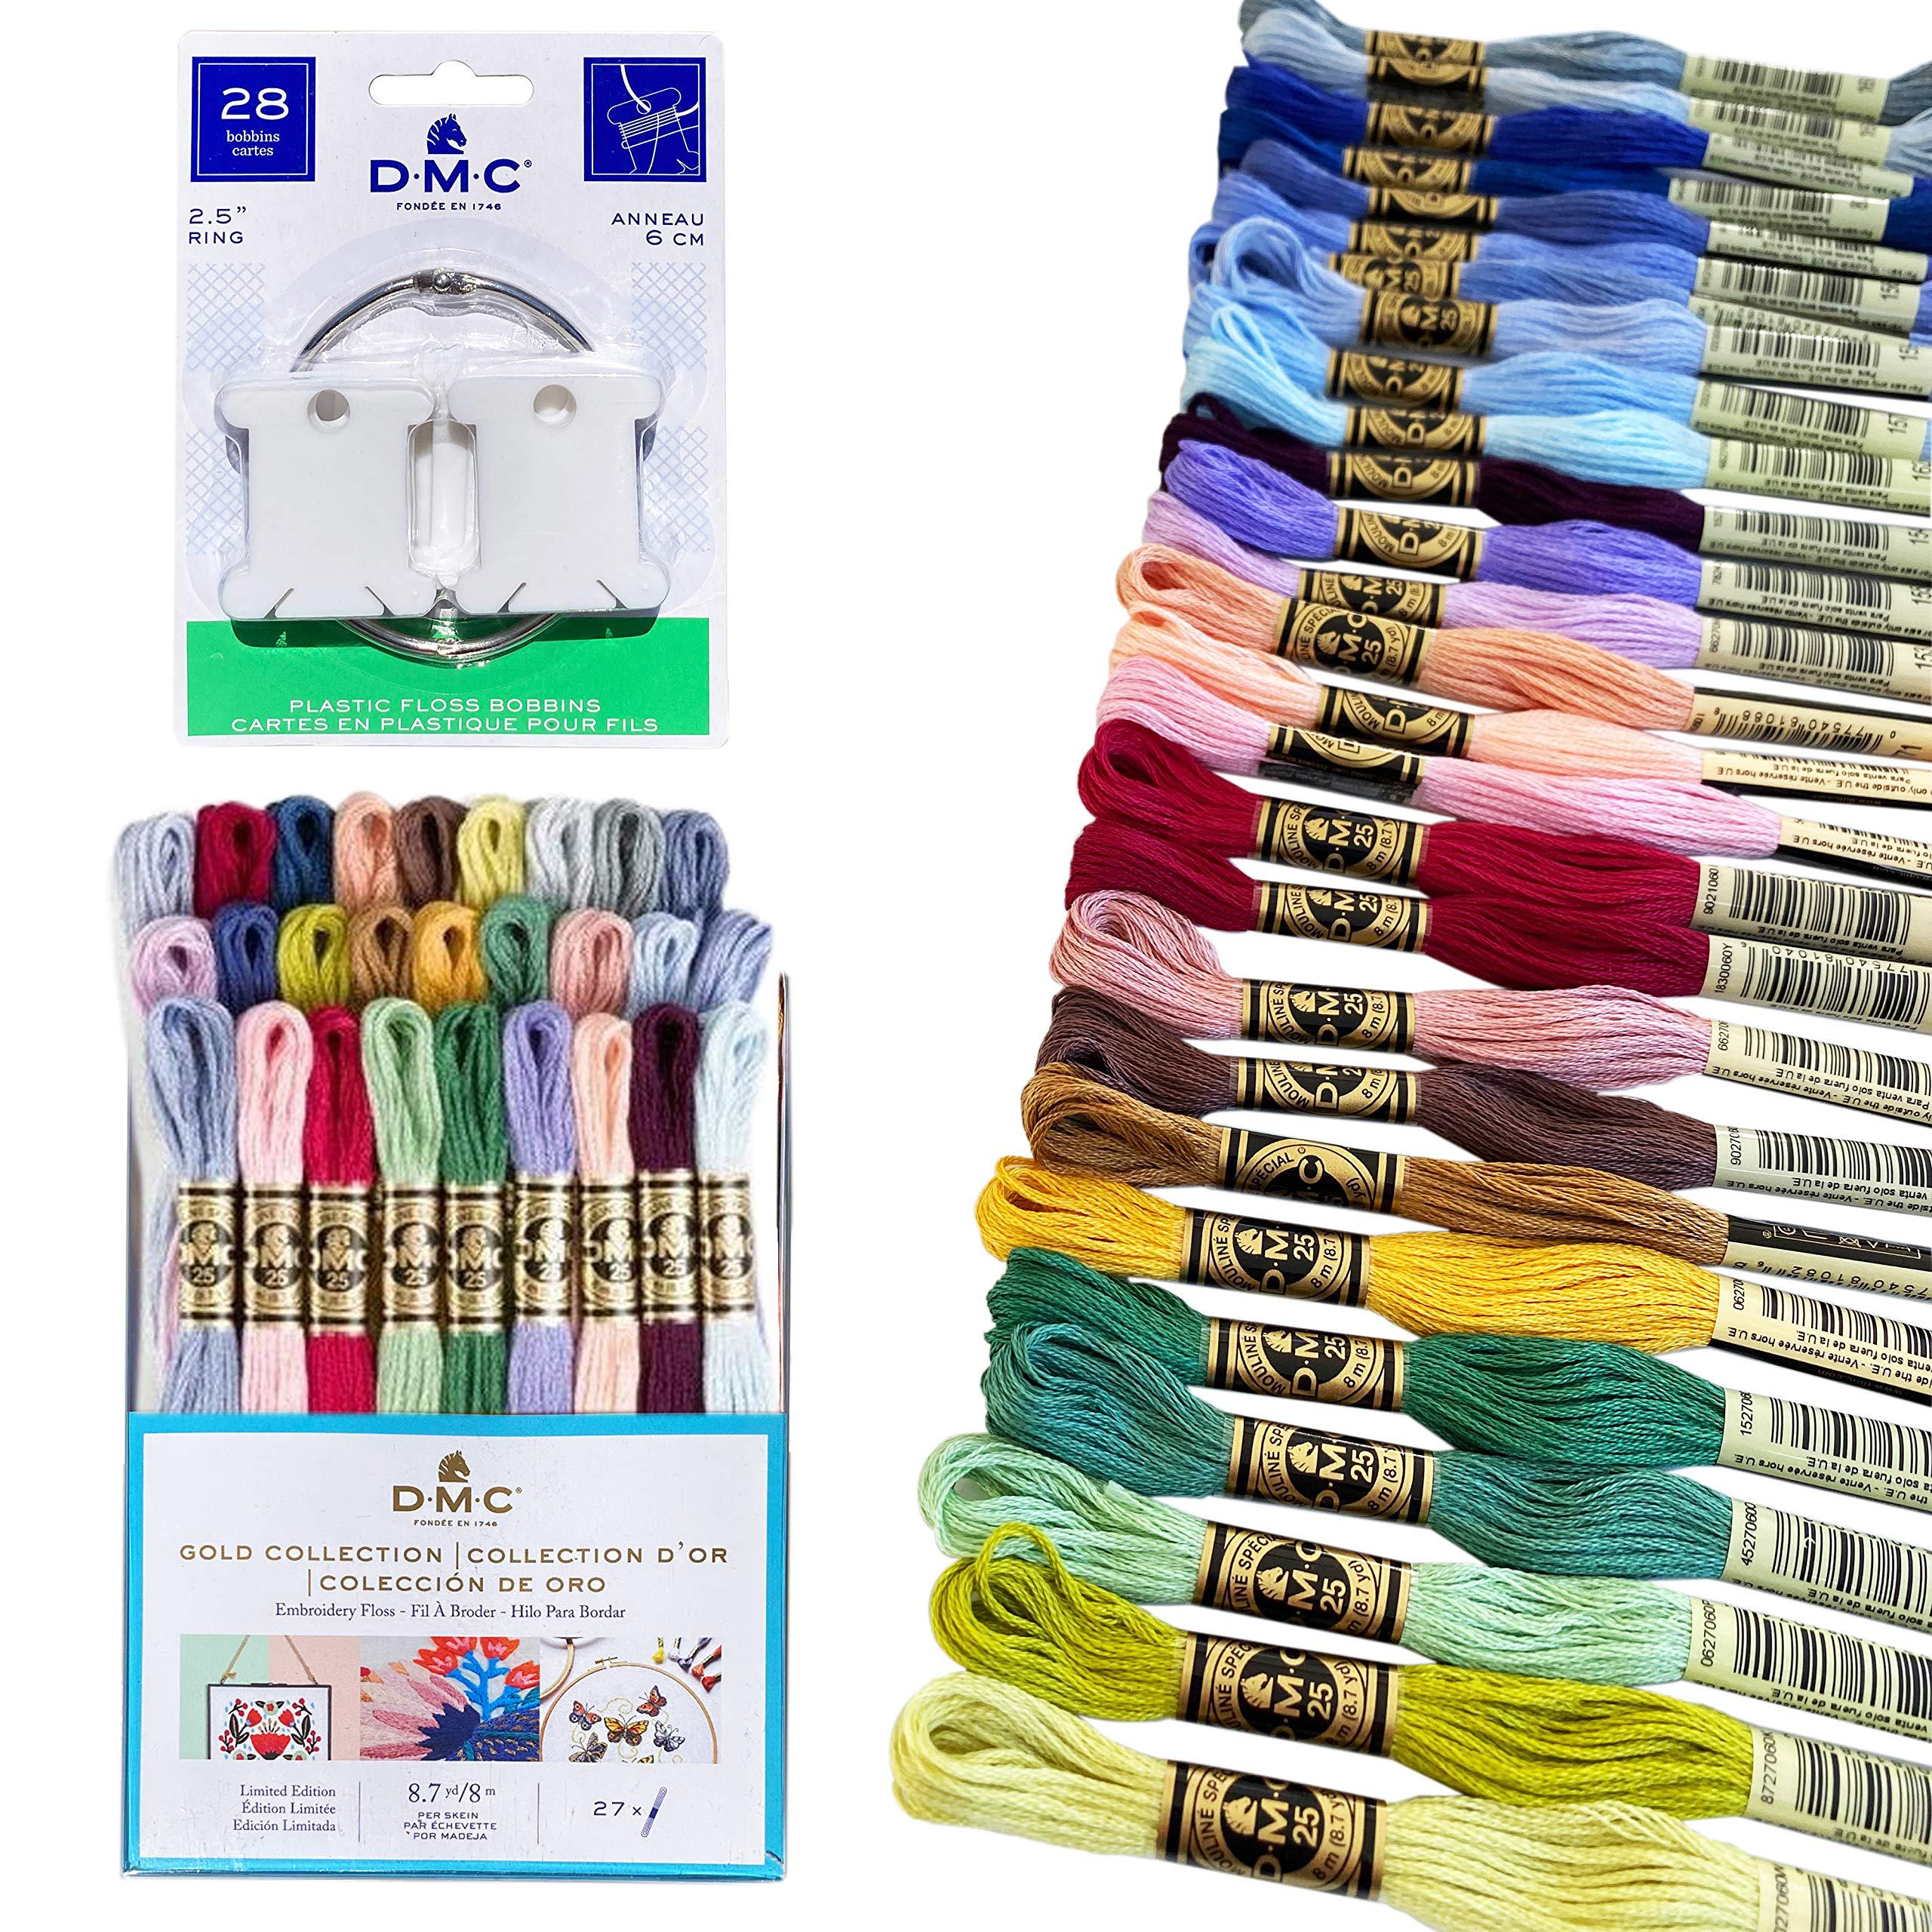 Charming Melodie dmc embroidery floss kit,gold collection,dmc